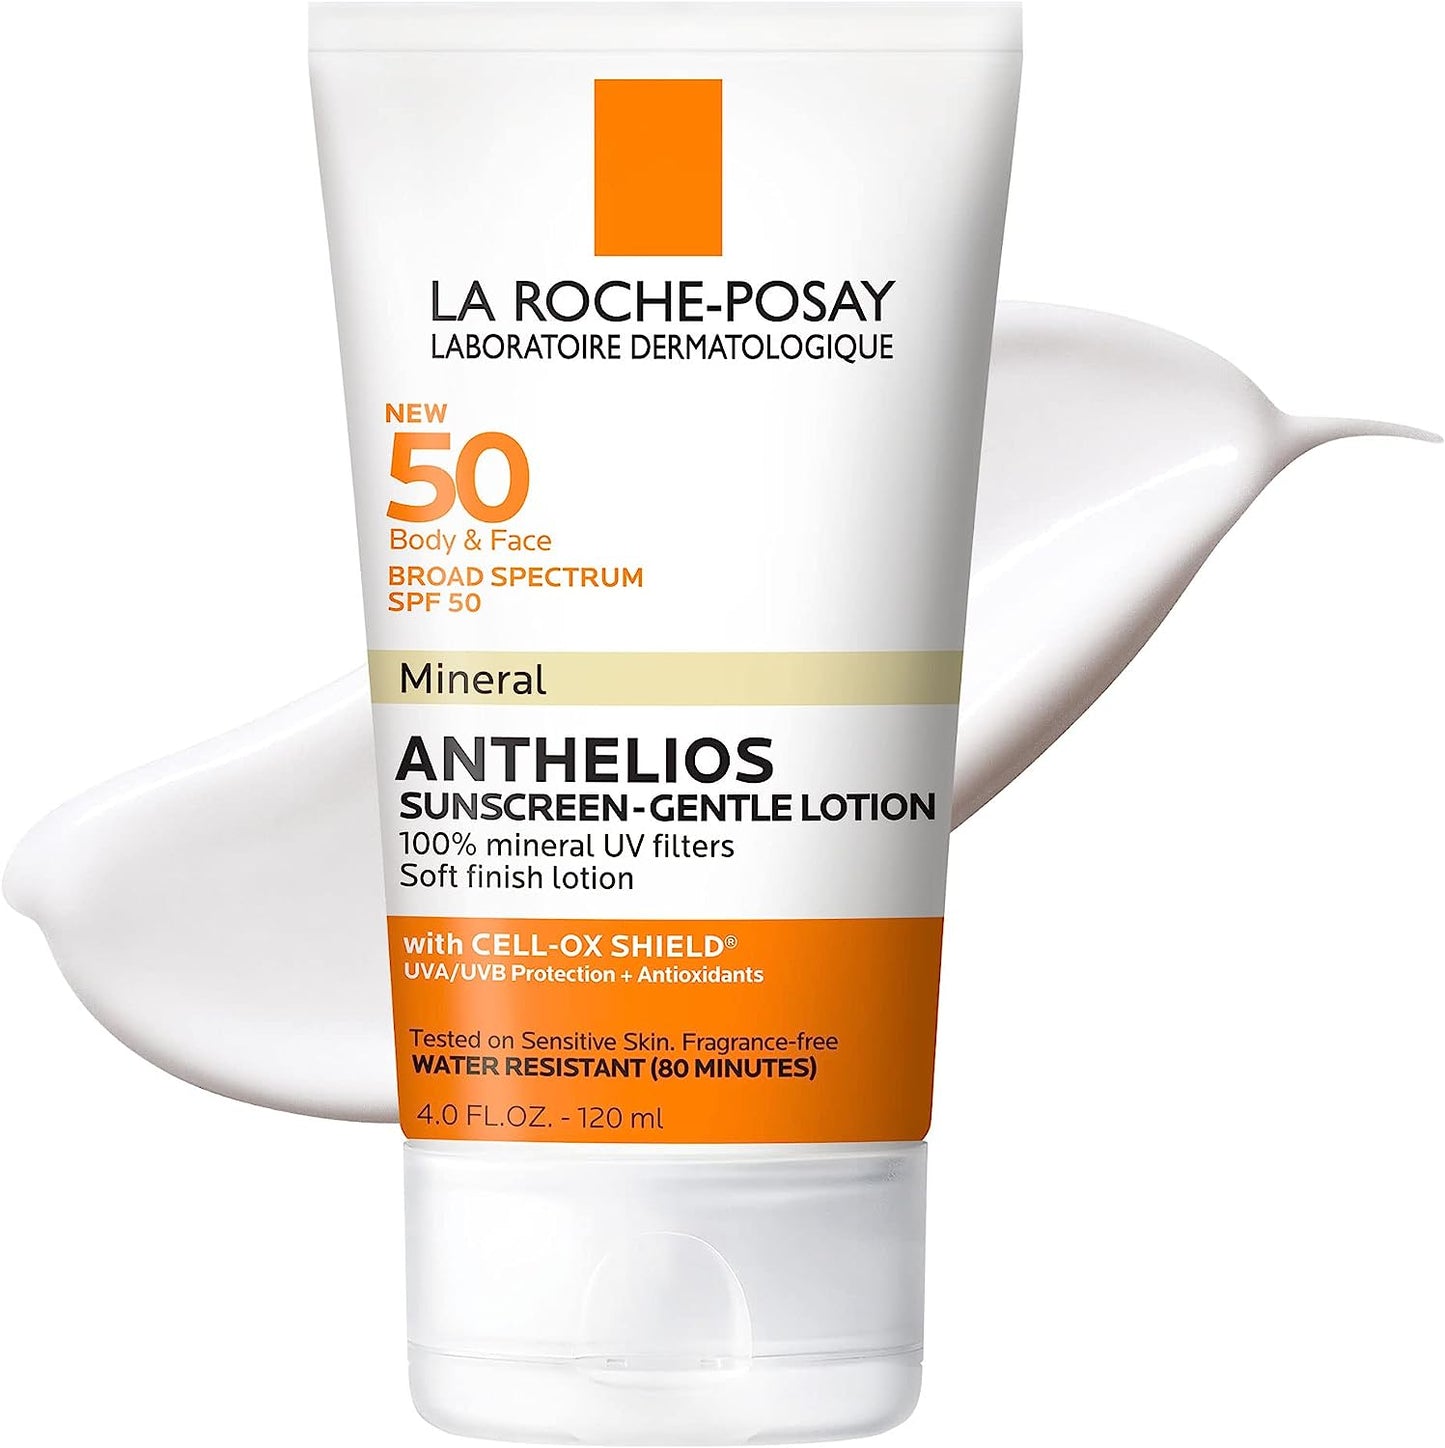 La Roche-Posay Anthelios Mineral Sunscreen- Gentle Lotion Spf50, 90ml